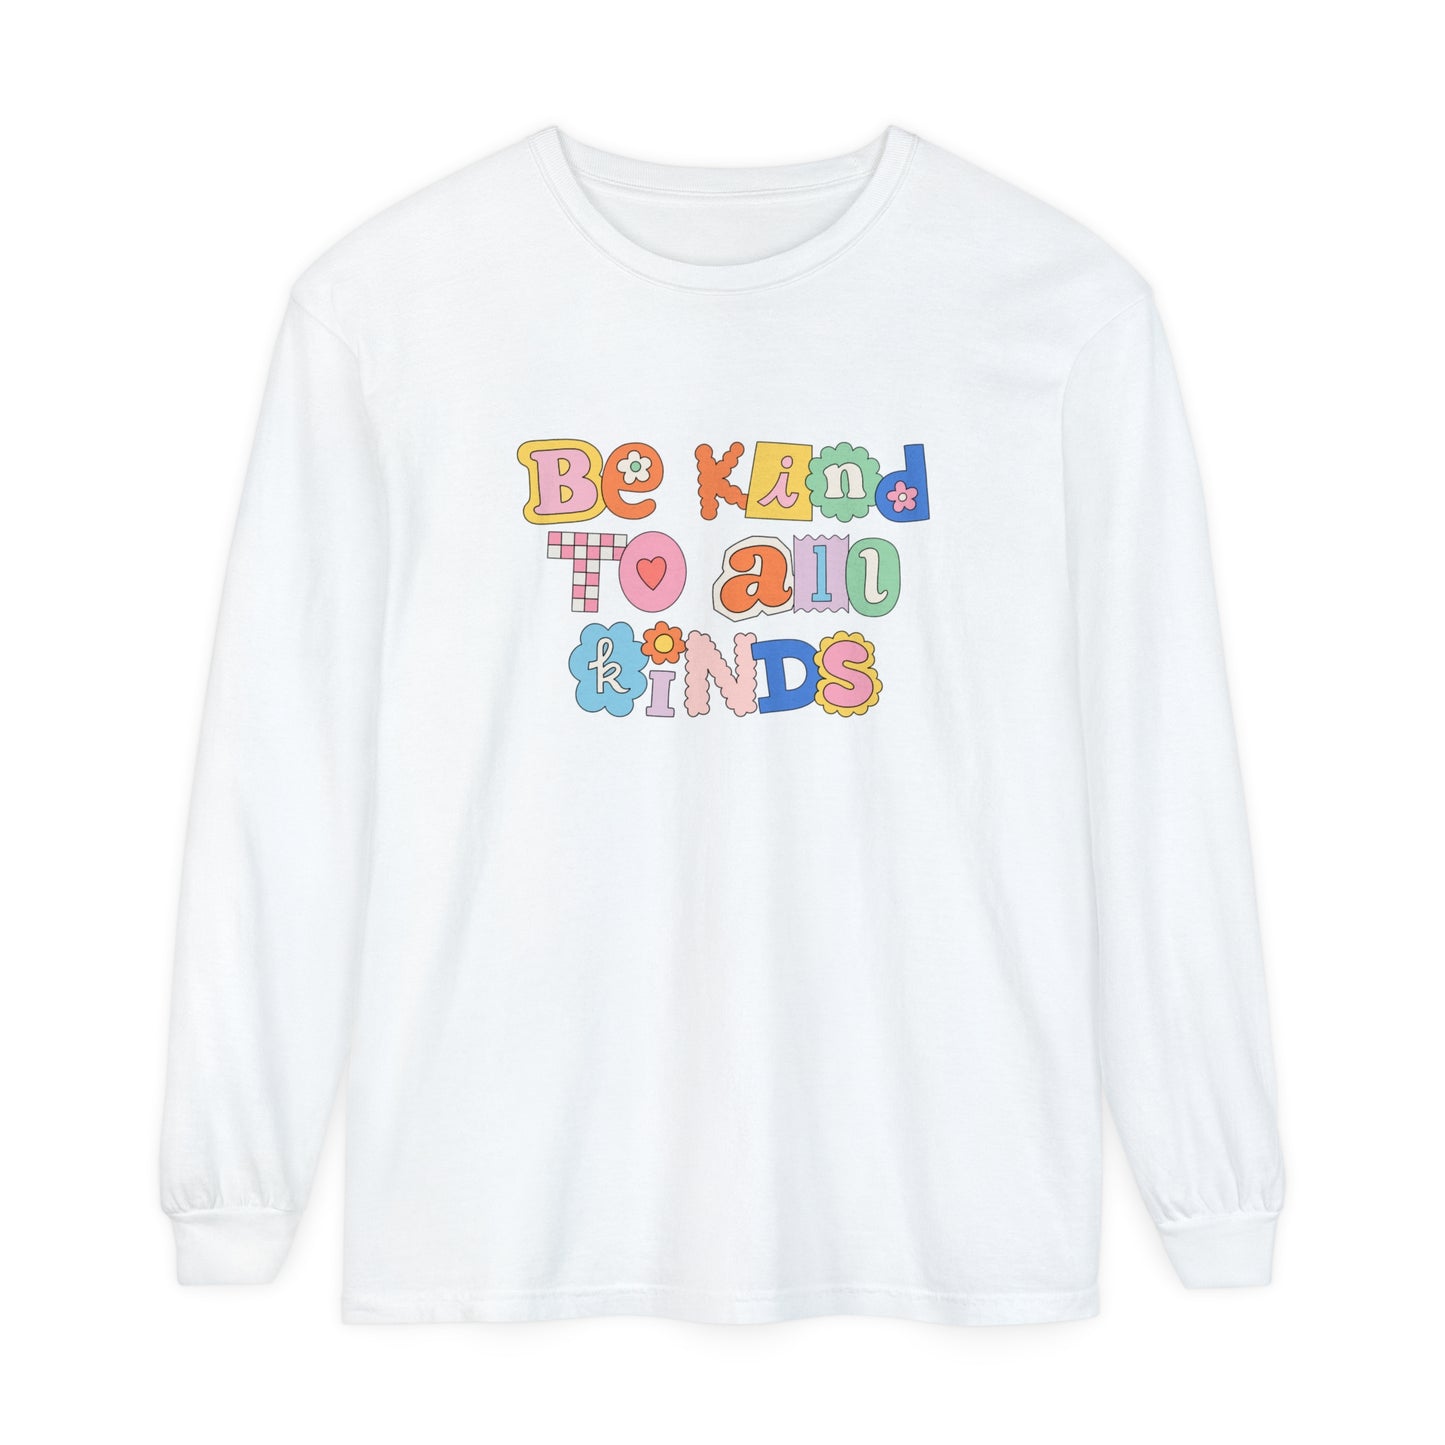 Be Kind to All Kinds Long Sleeve Comfort Colors T-shirt